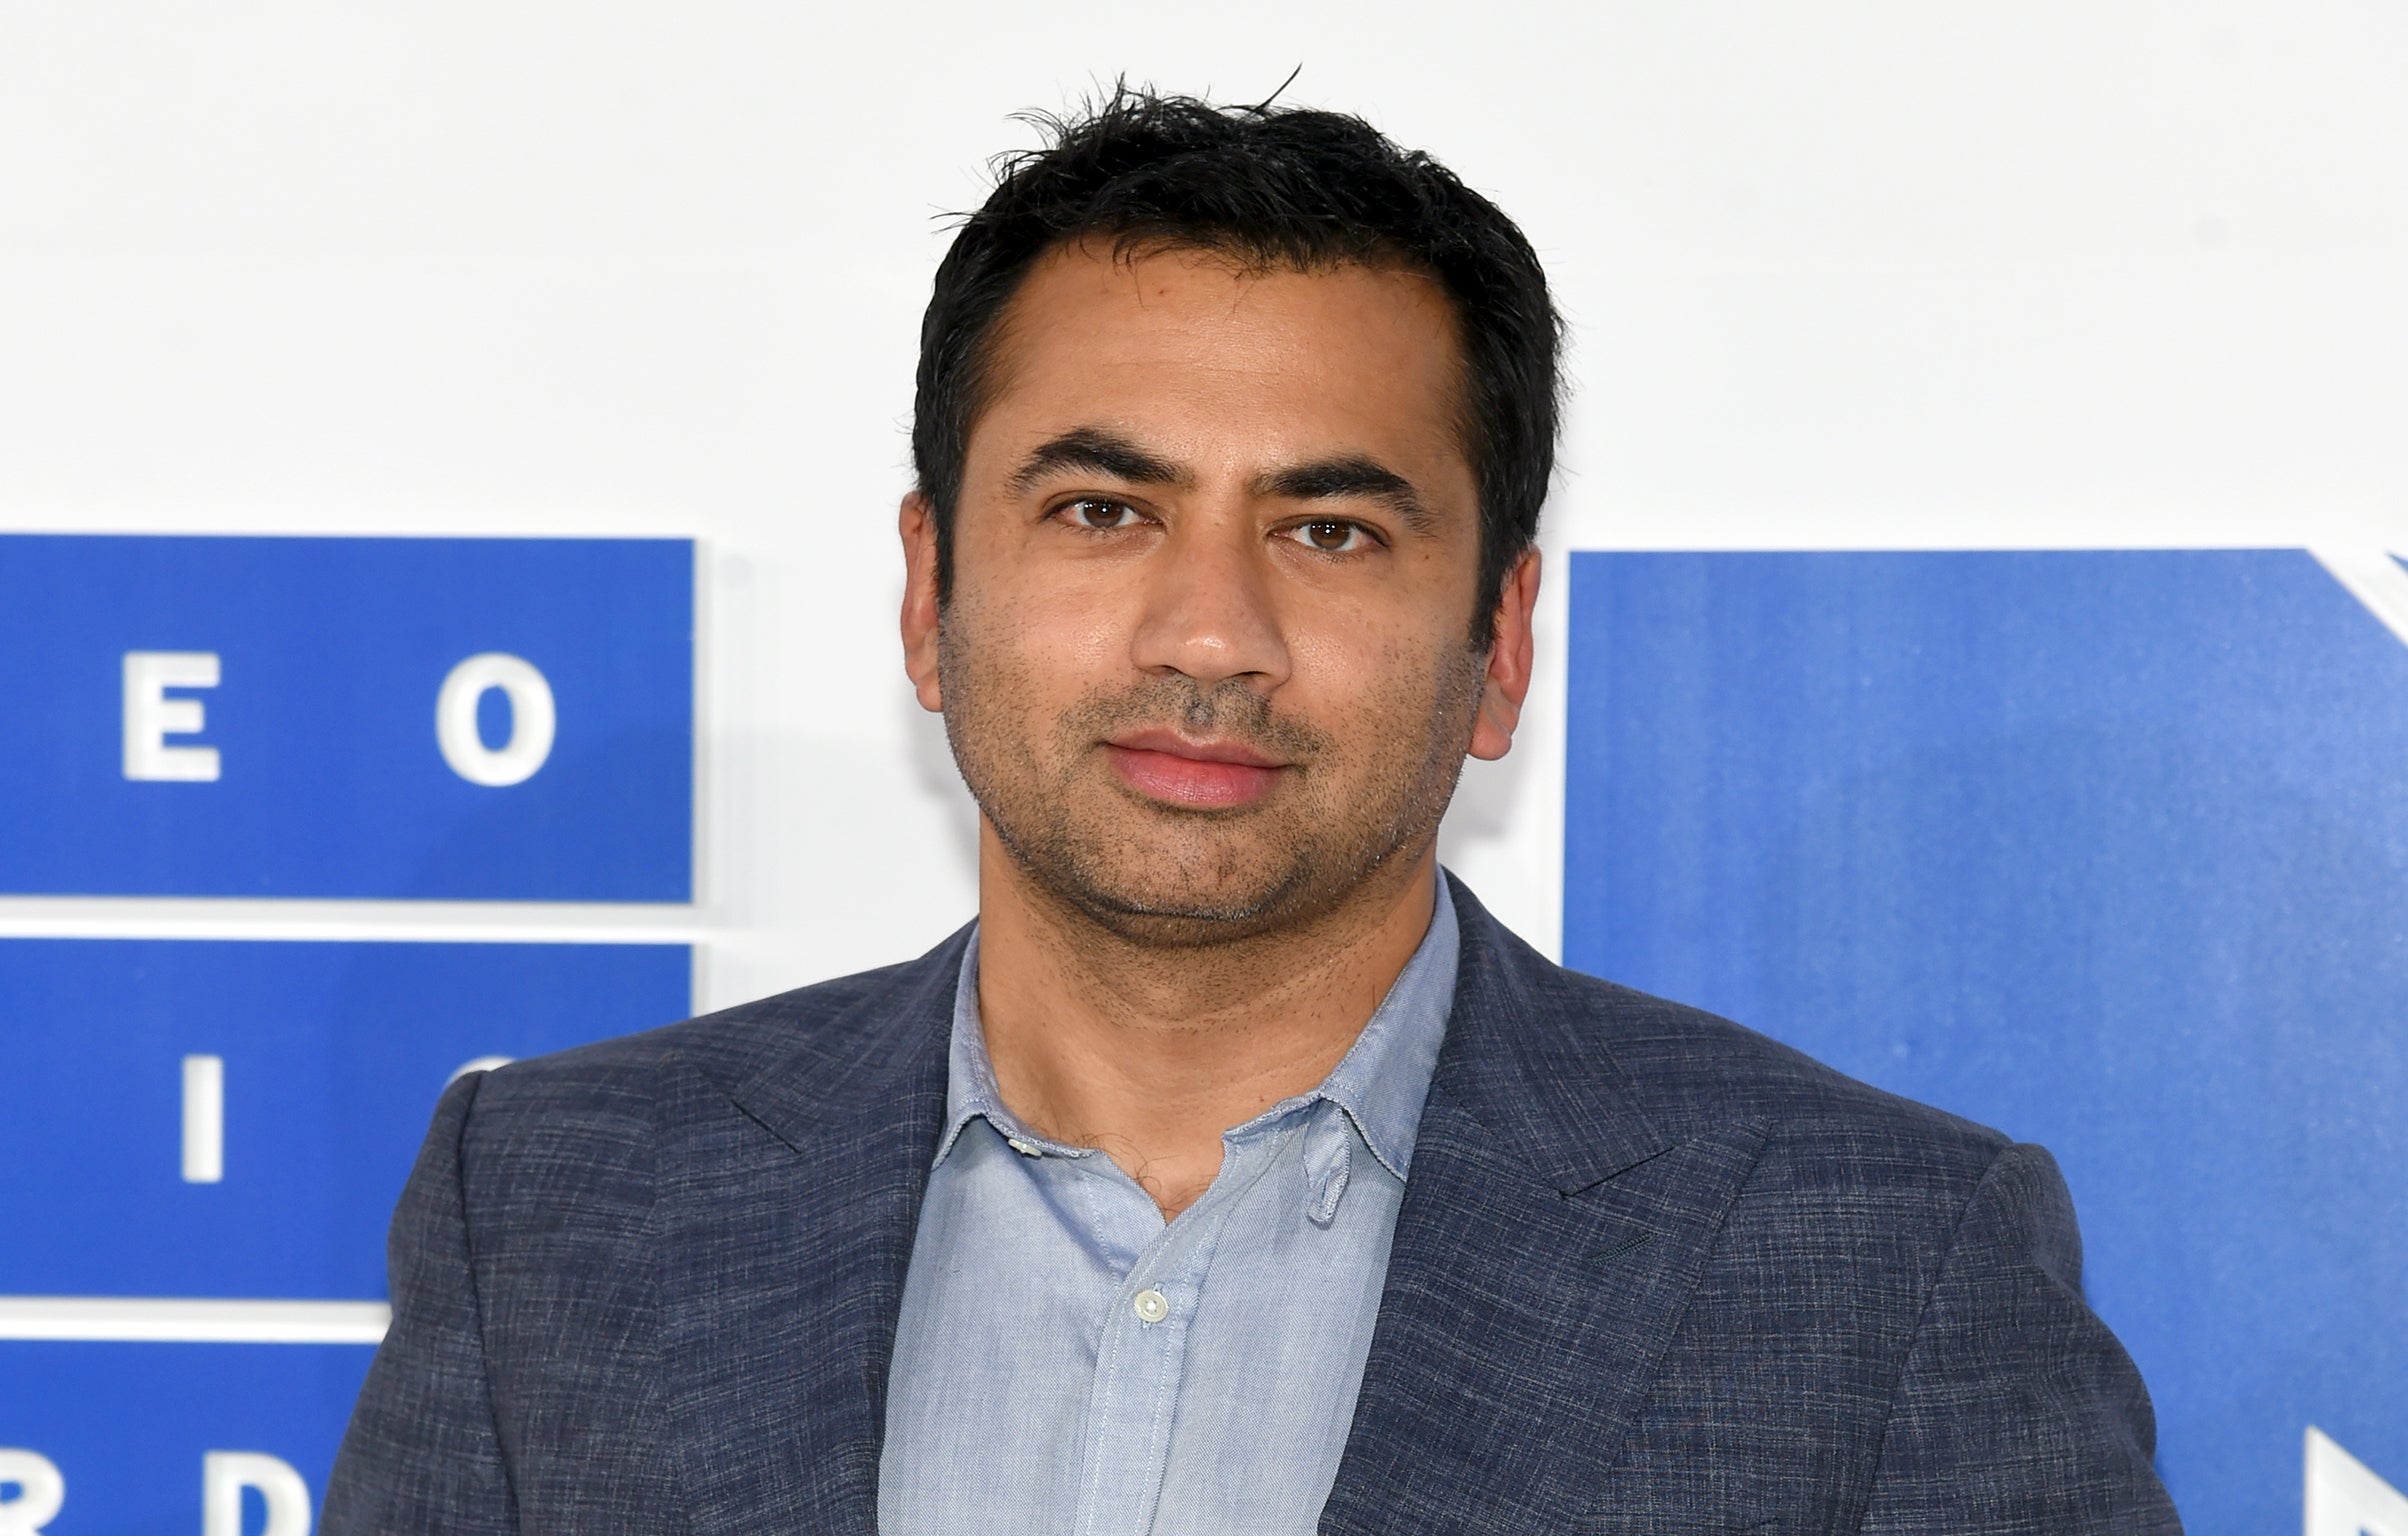 Actor Kal Penn launched a scathing attack on Donald Trump after the White House suggested the President had decided to disband the Committee on the Arts and Humanities before all of its members resigned over his response to violence in Charlottesville.